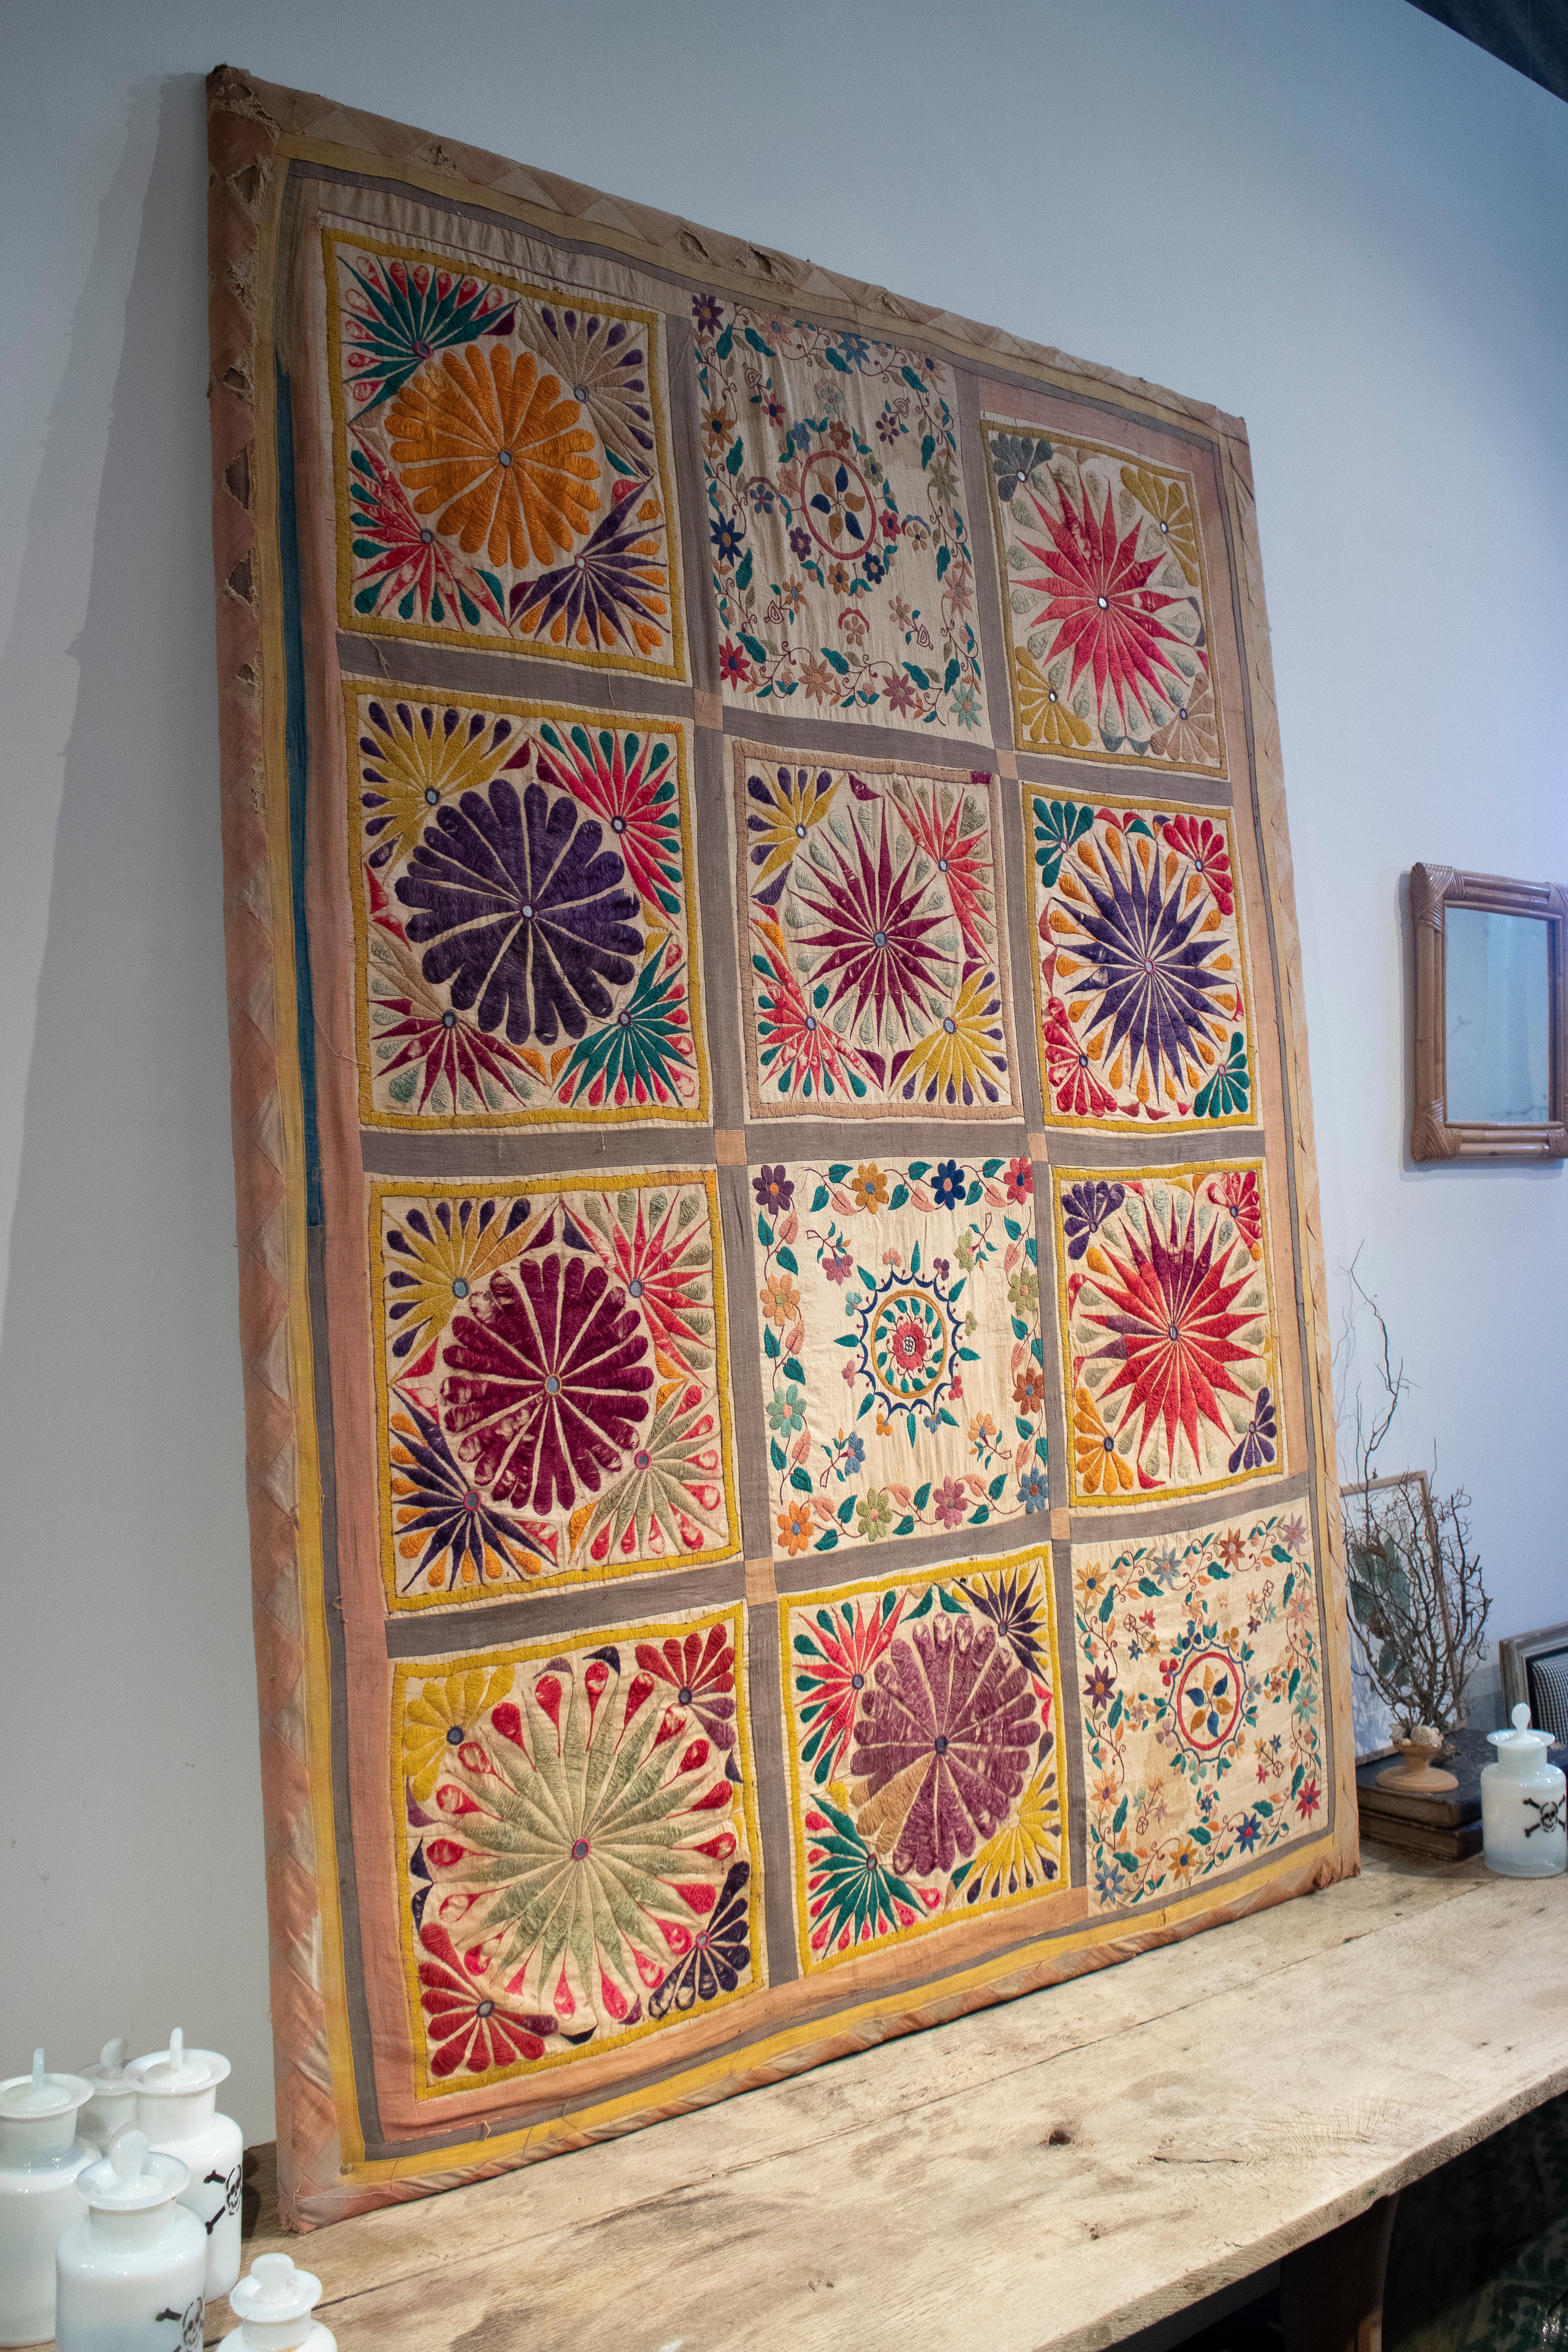 Vintage 1950s Indian hand woven tapestry quilt with colourful detailed embroidery.